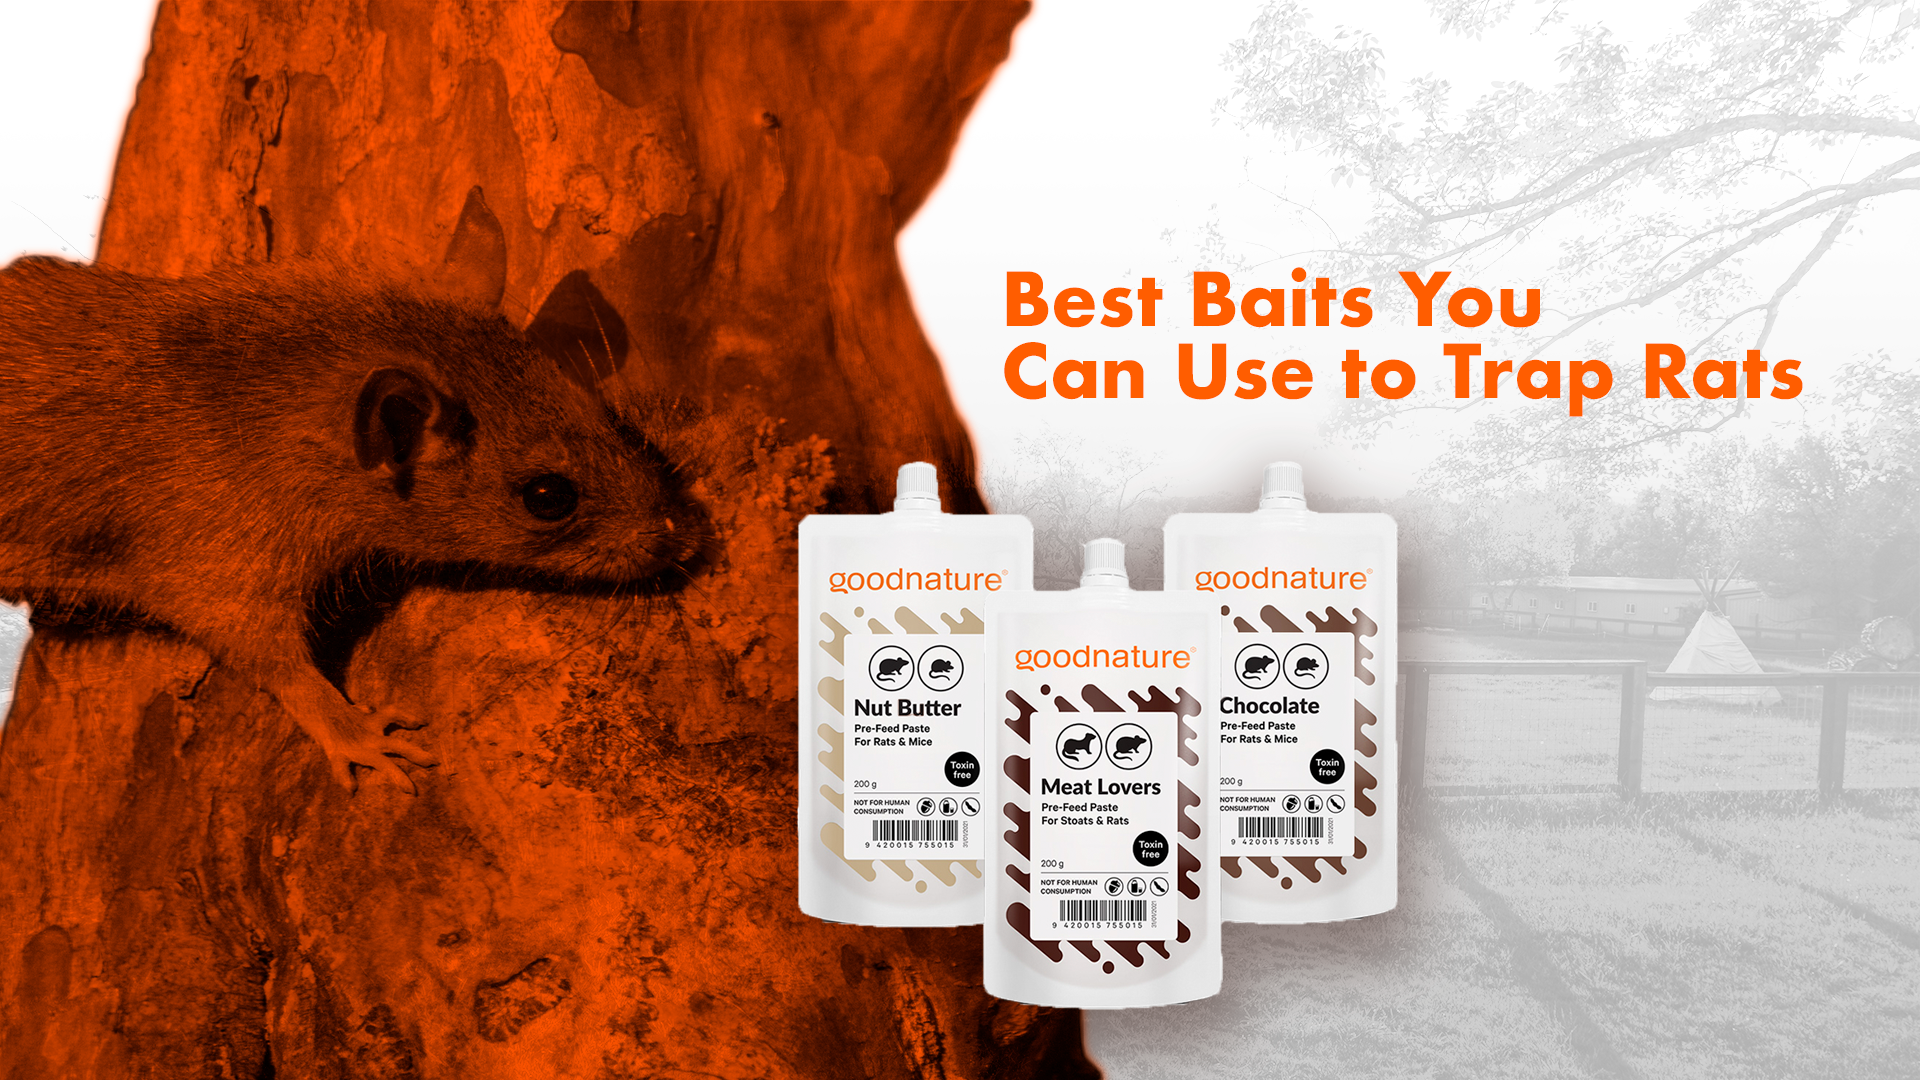 http://www.automatictrap.com/cdn/shop/articles/Best_Baits_You_Can_Use_to_Trap_Rats.png?v=1694190238